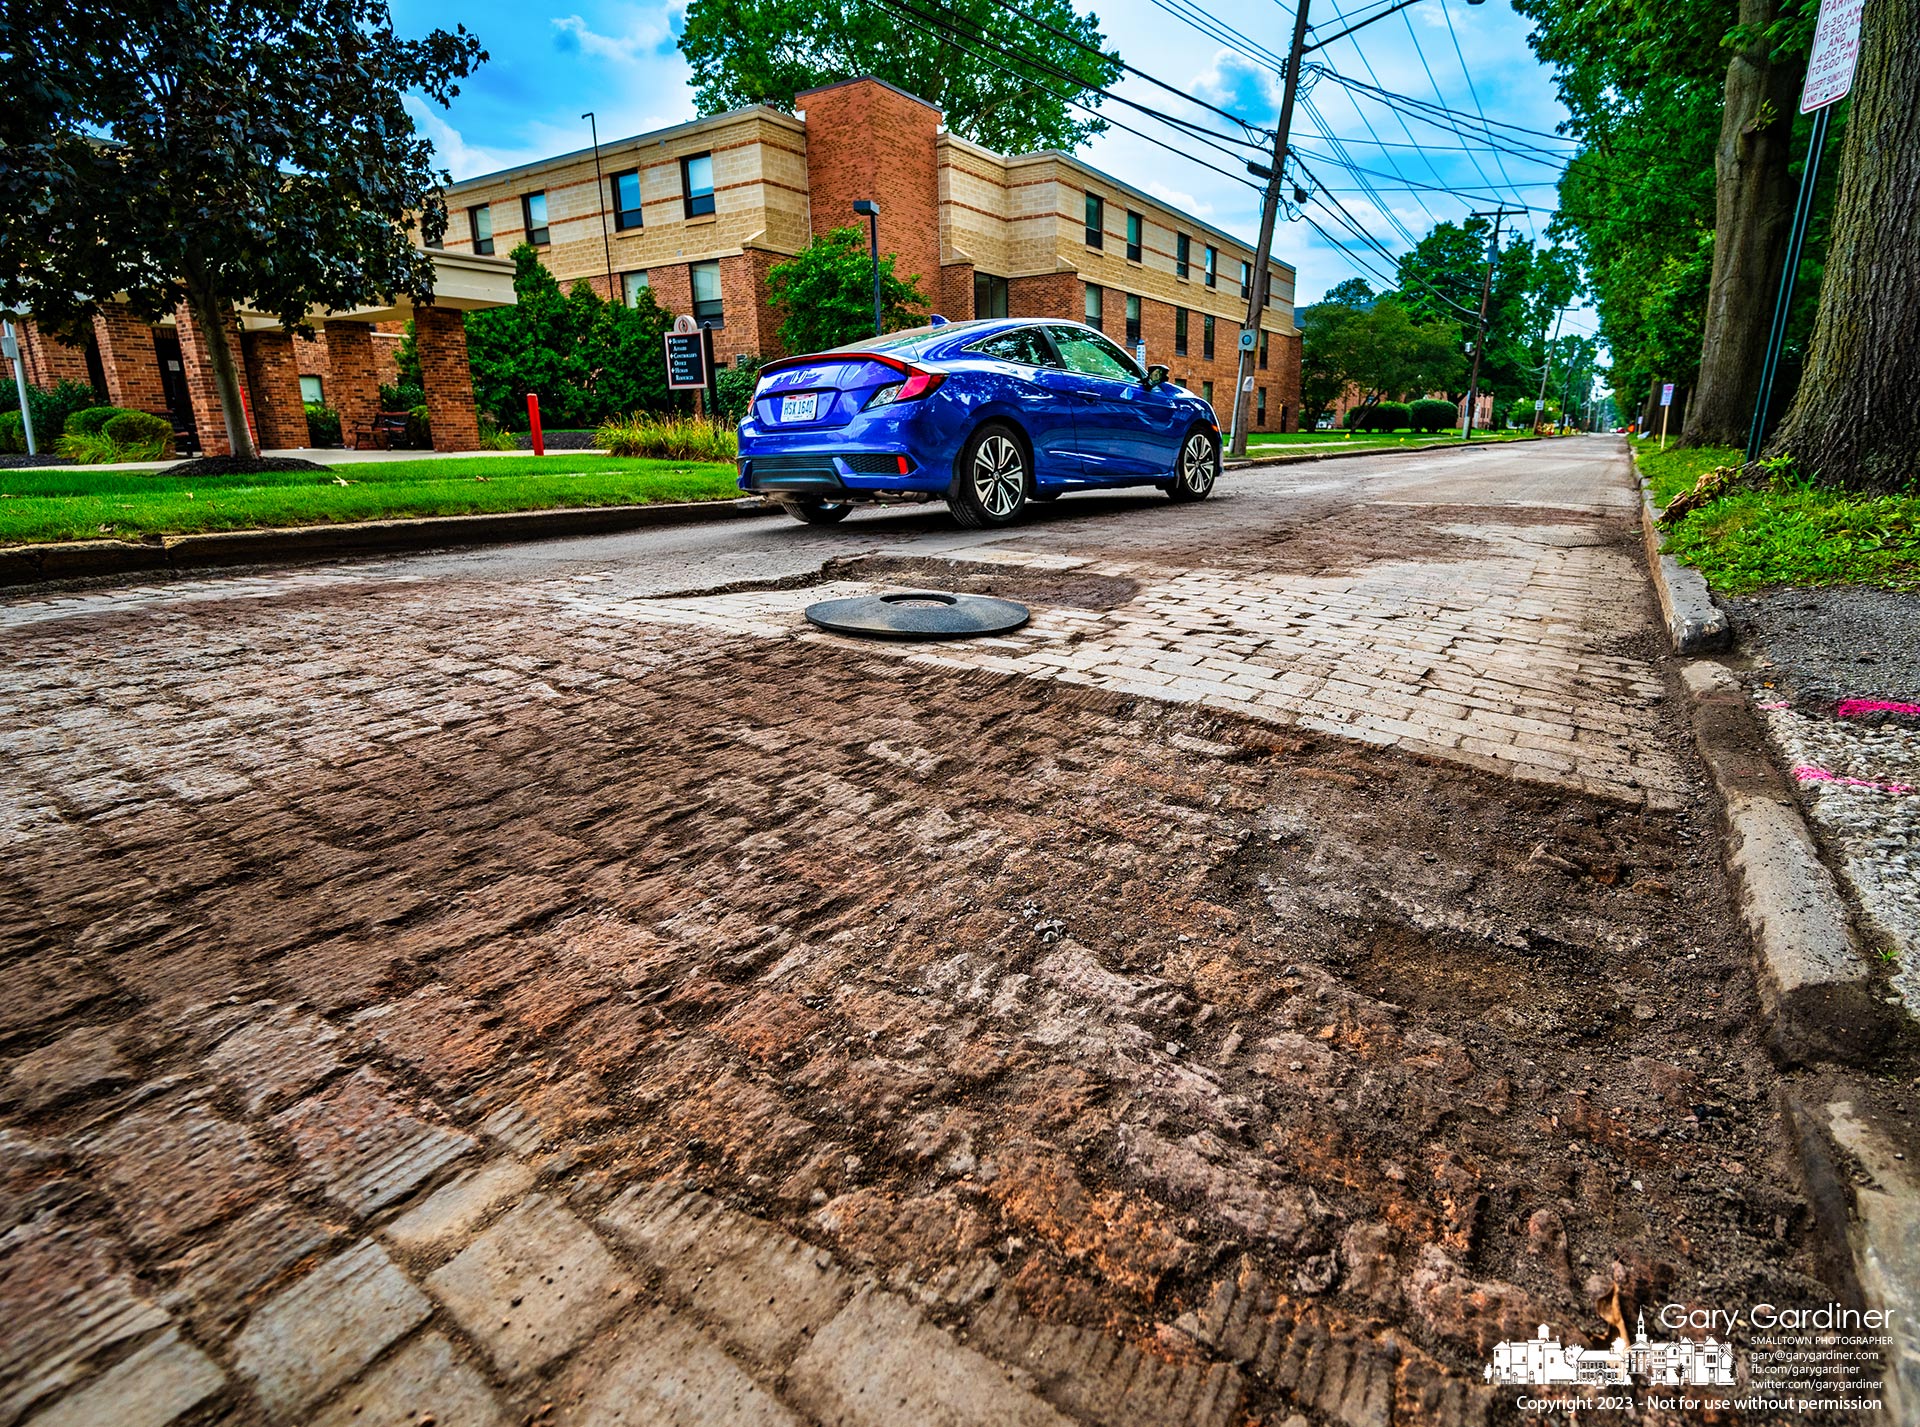 Paving bricks sit exposed on West Home Street after a paving crew milled away the asphalt surface preparing it for repaving this weekend before the arrival next week of first-year students at Otterbein University. My Final Photo for August 11, 2023.